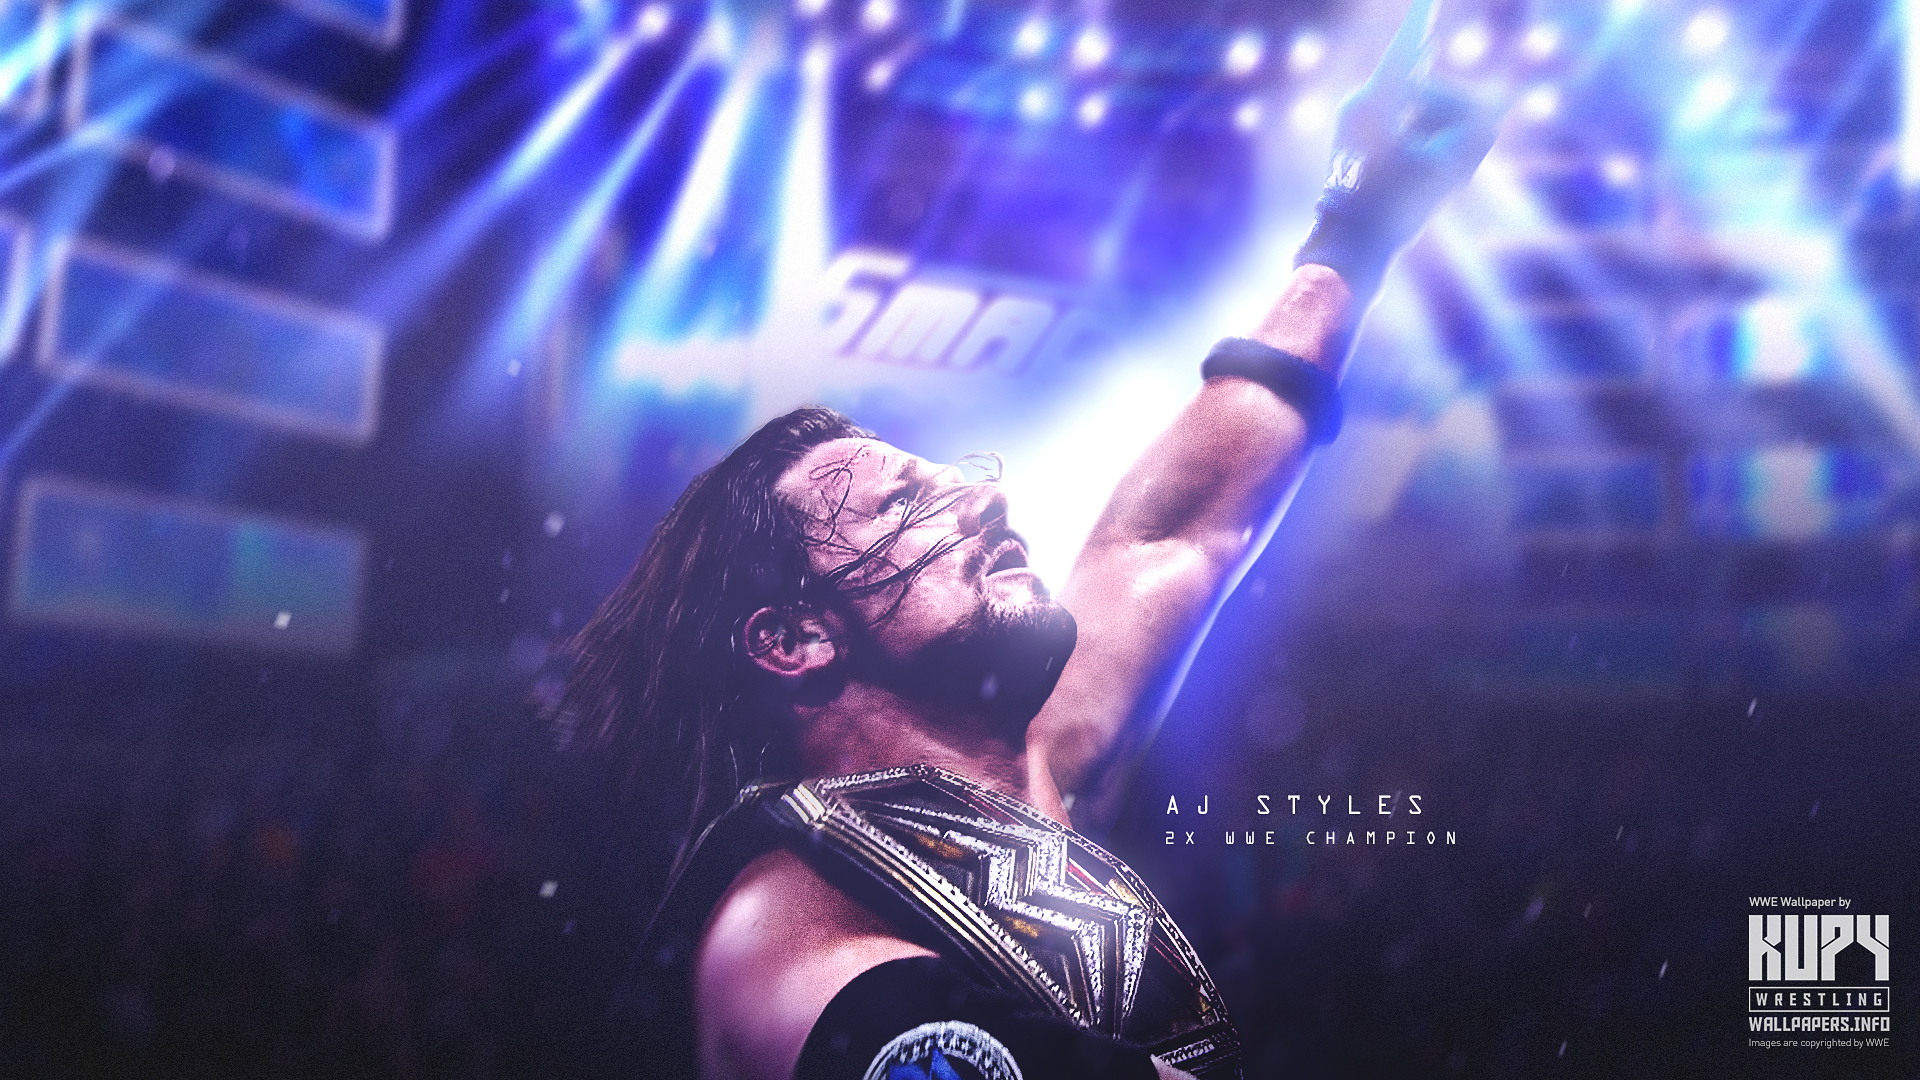 AJ Styles Archives - Page 2 of 4 - Kupy Wrestling Wallpapers